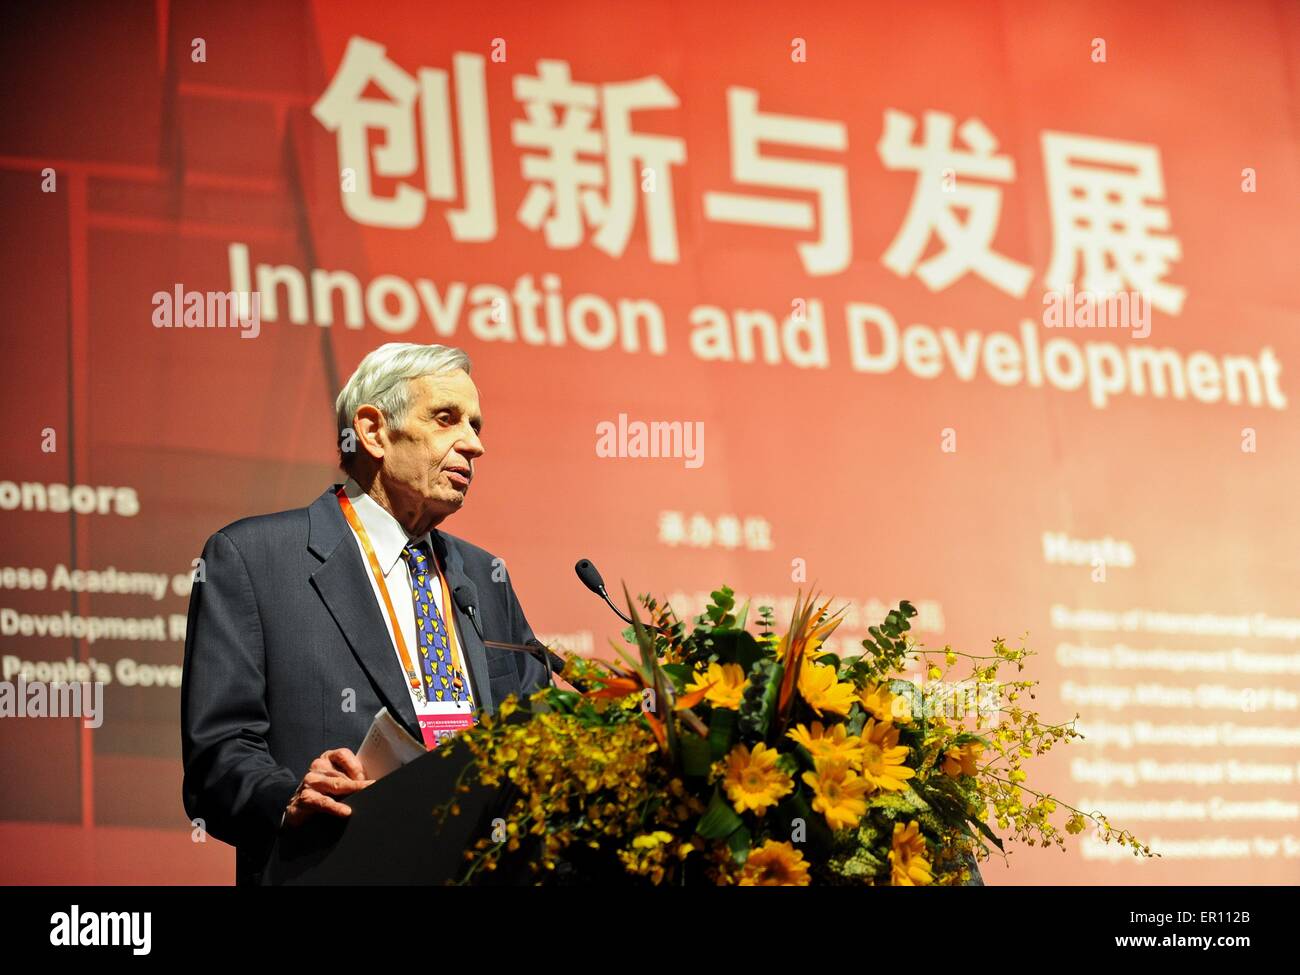 FILE PIX: New York, USA. 28th Sep, 2011. The file photo taken on Sept. 28, 2011 shows the Nobel Prize laureate John Nash delivering a speech during Nobel Laureates Beijing Forum 2011 in Beijing, capital of China. Renowned Princeton Mathematician John Nash, a Nobel Prize laureate whose life story inspired the movie 'A Beautiful Mind', was killed in a car accident together with his wife in New Jersey, U.S. media reported Sunday. Credit:  Zhang Yu/Xinhua/Alamy Live News Stock Photo